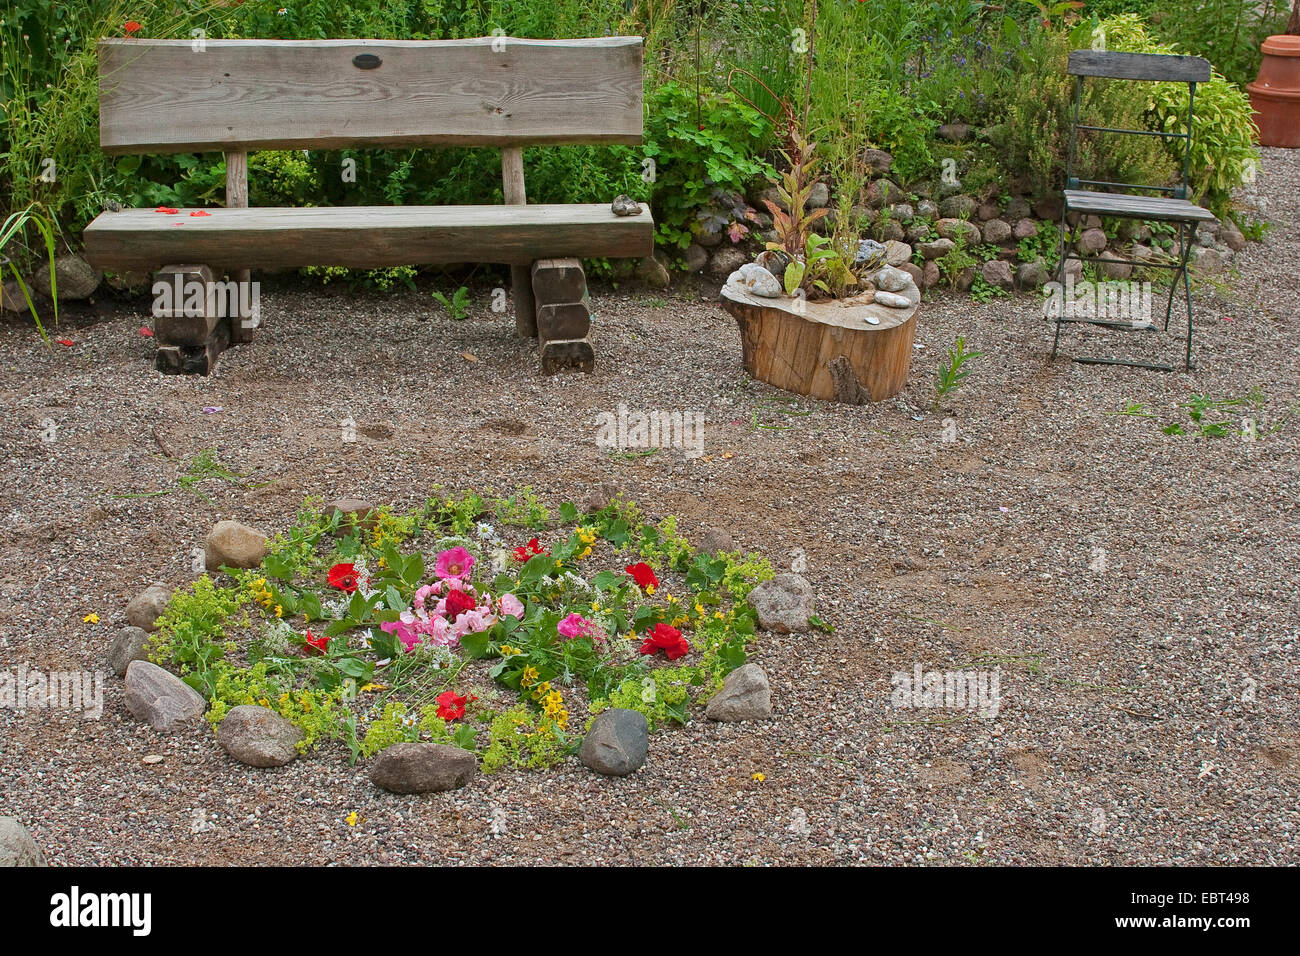 common lady's-mantle (Alchemilla vulgaris), wooden bench in front of flower arrangement in the shingle with blossoms and petals of rose, common poppy, lady's mantle and garden loosestrife, Germany Stock Photo